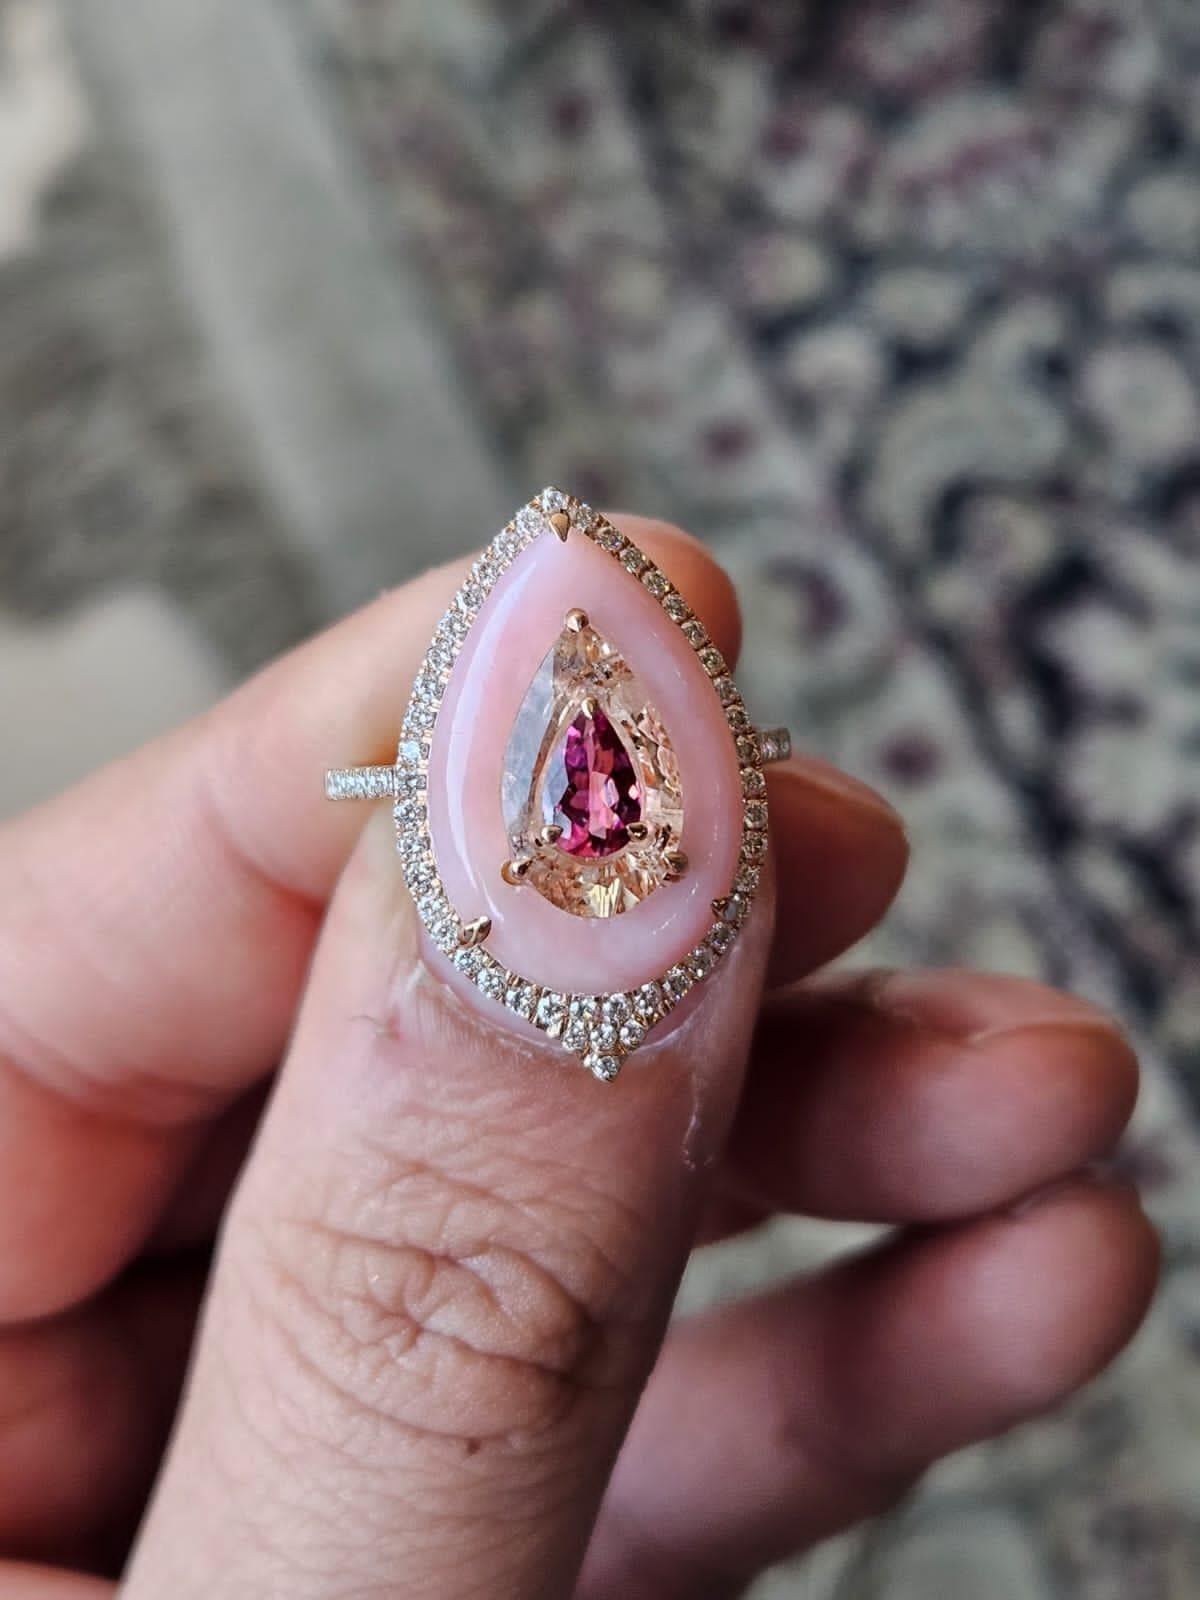 A very stunning and gorgeous, Pink Opal, Morganite, & Tourmaline Cocktail Ring set in 18K Rose Gold & Diamonds. The weight of the Pink Opal is 3.73 carats. The weight of the Morganite is 1.34 carats. The weight of the Tourmaline is 0.27 carats. The